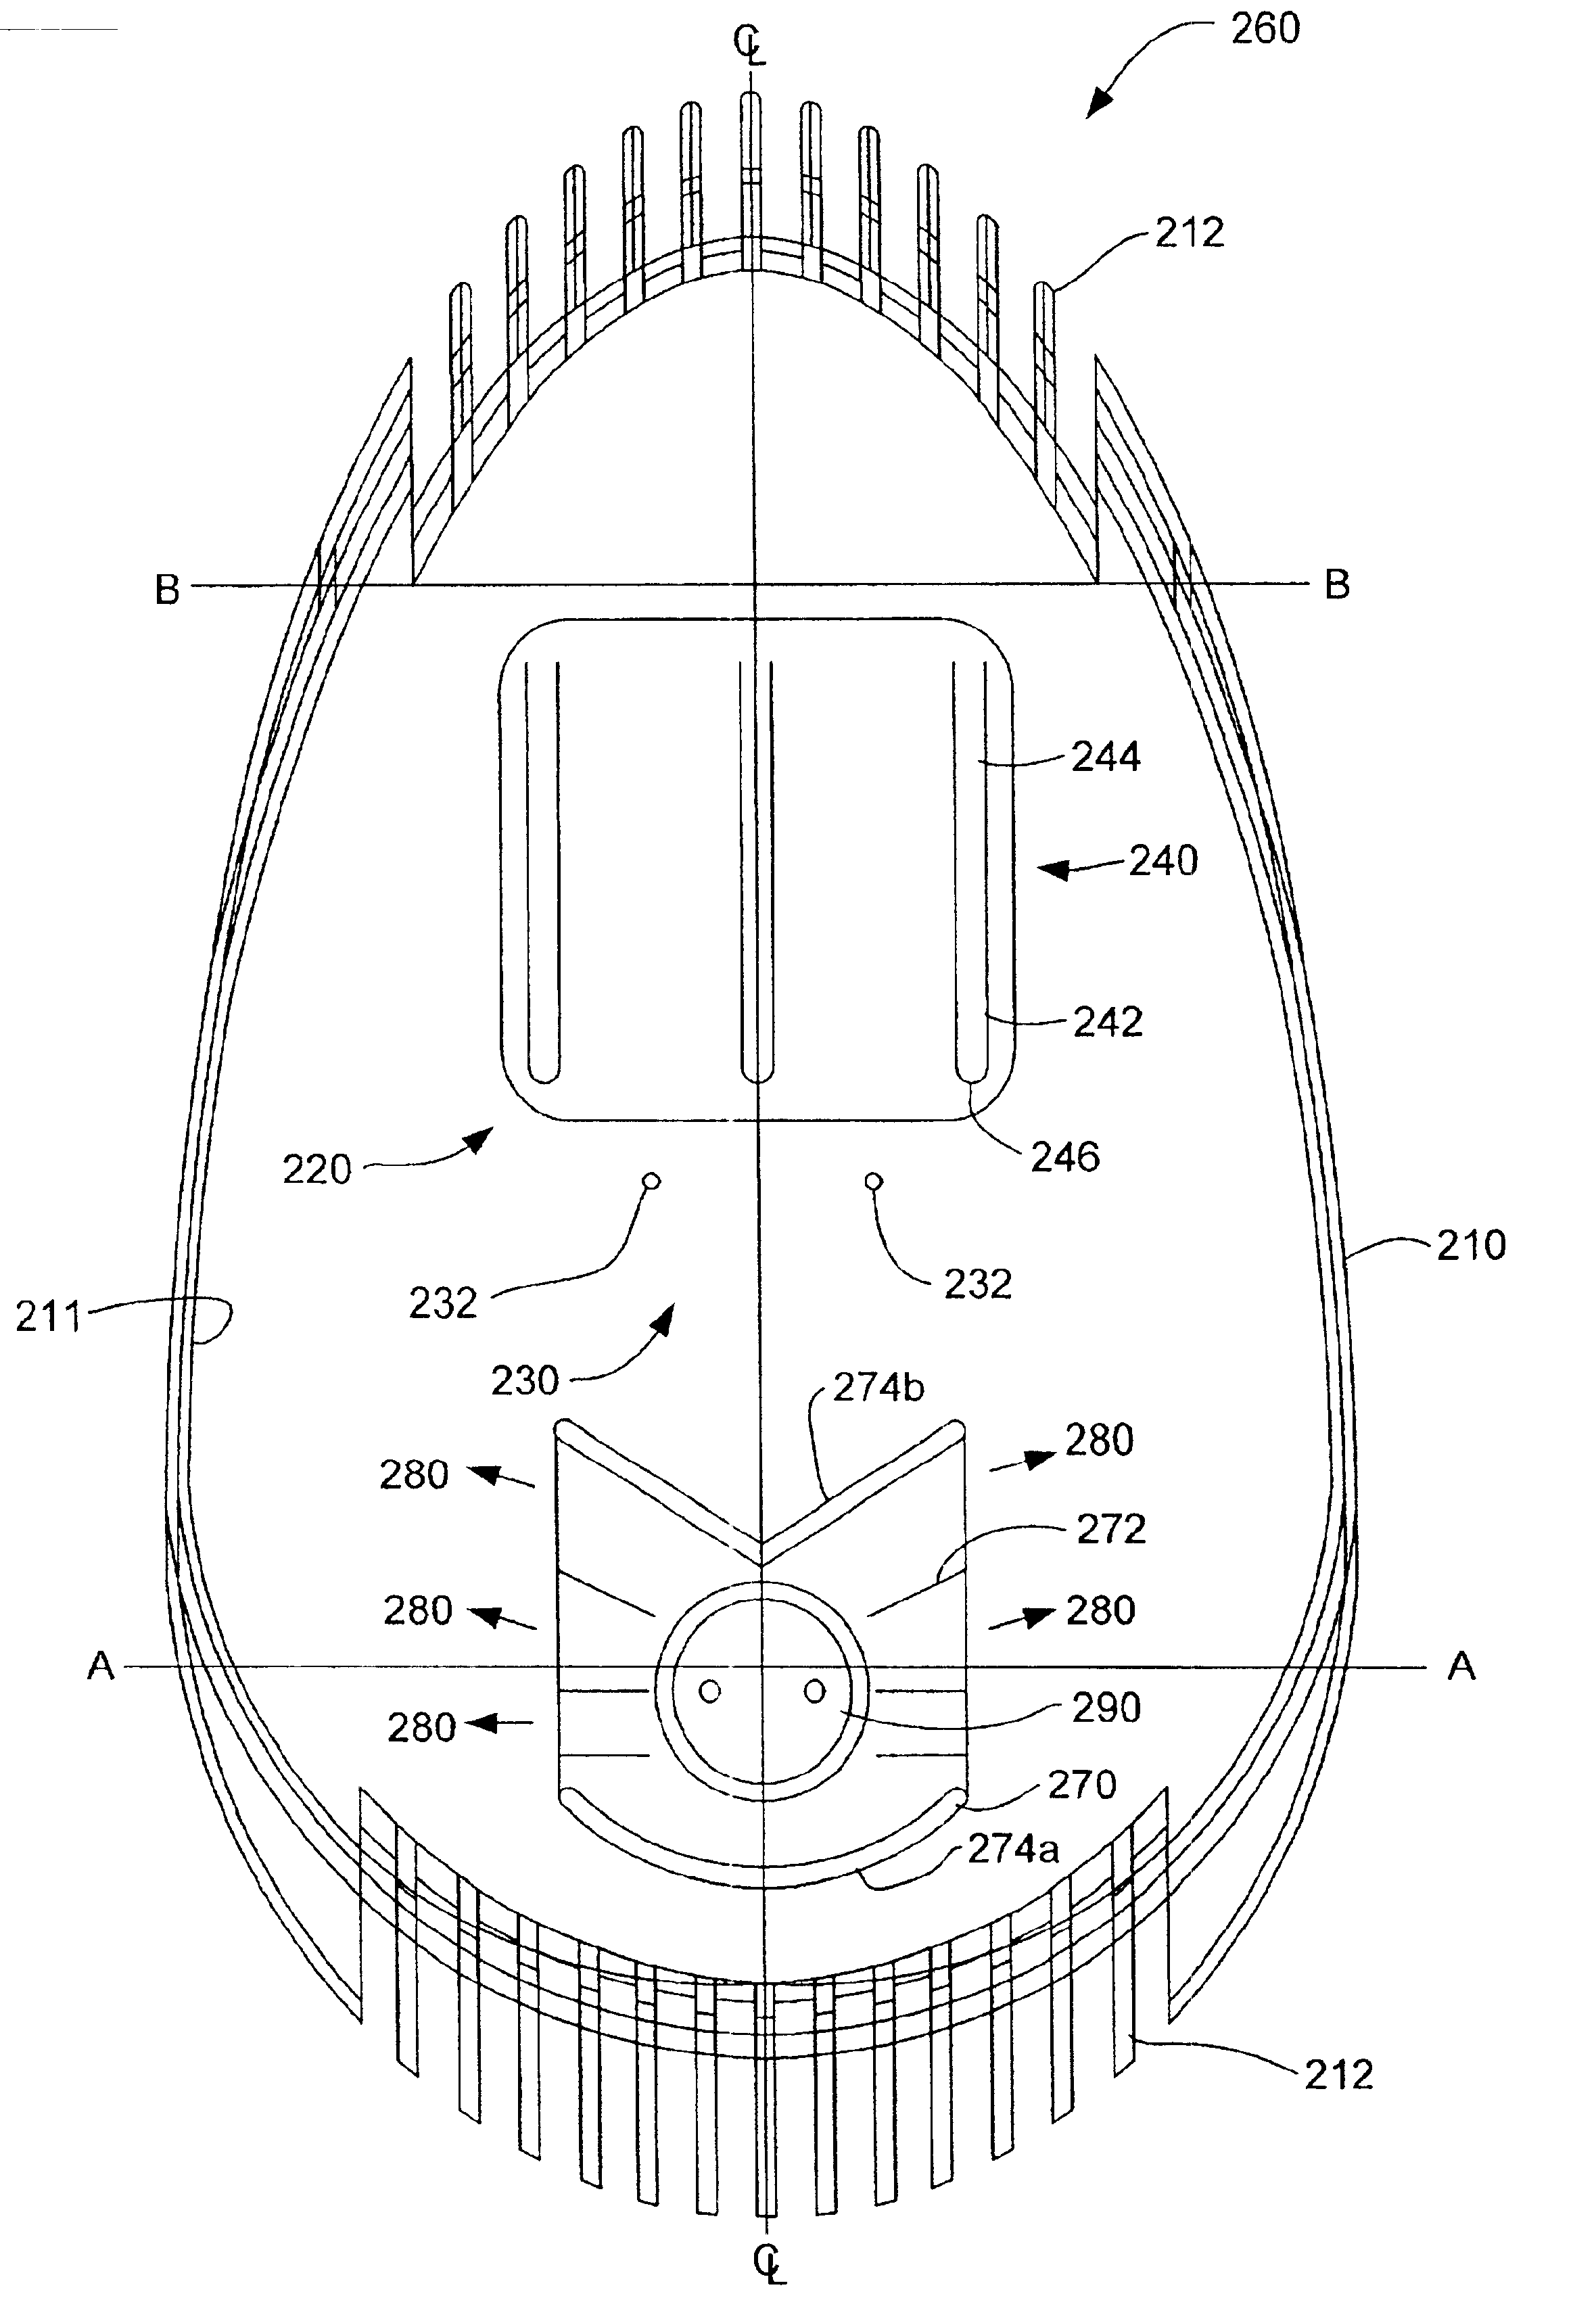 Electro-kinetic air transporter and conditioner device with enhanced anti-microorganism capability